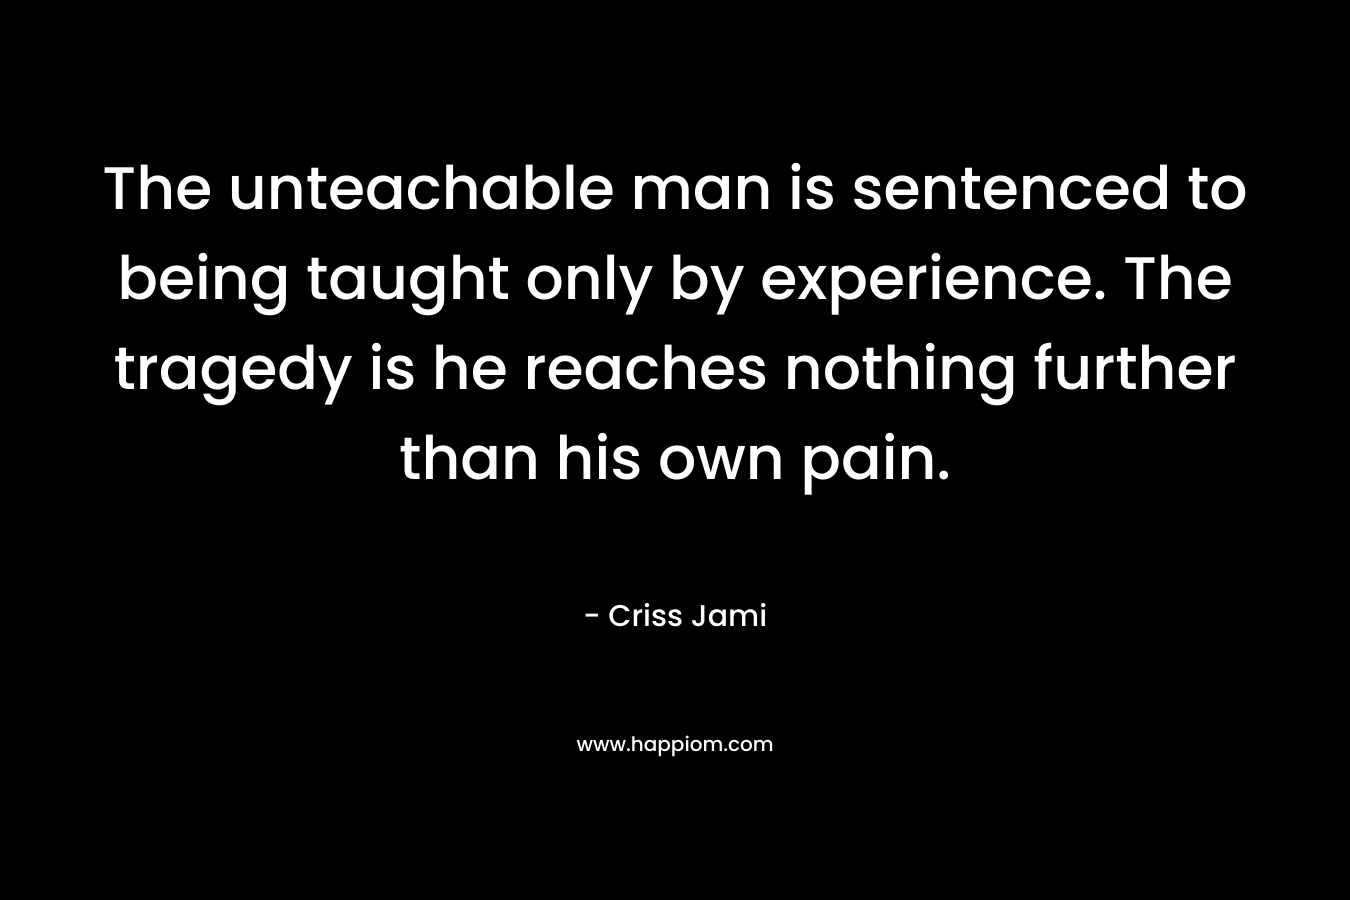 The unteachable man is sentenced to being taught only by experience. The tragedy is he reaches nothing further than his own pain.